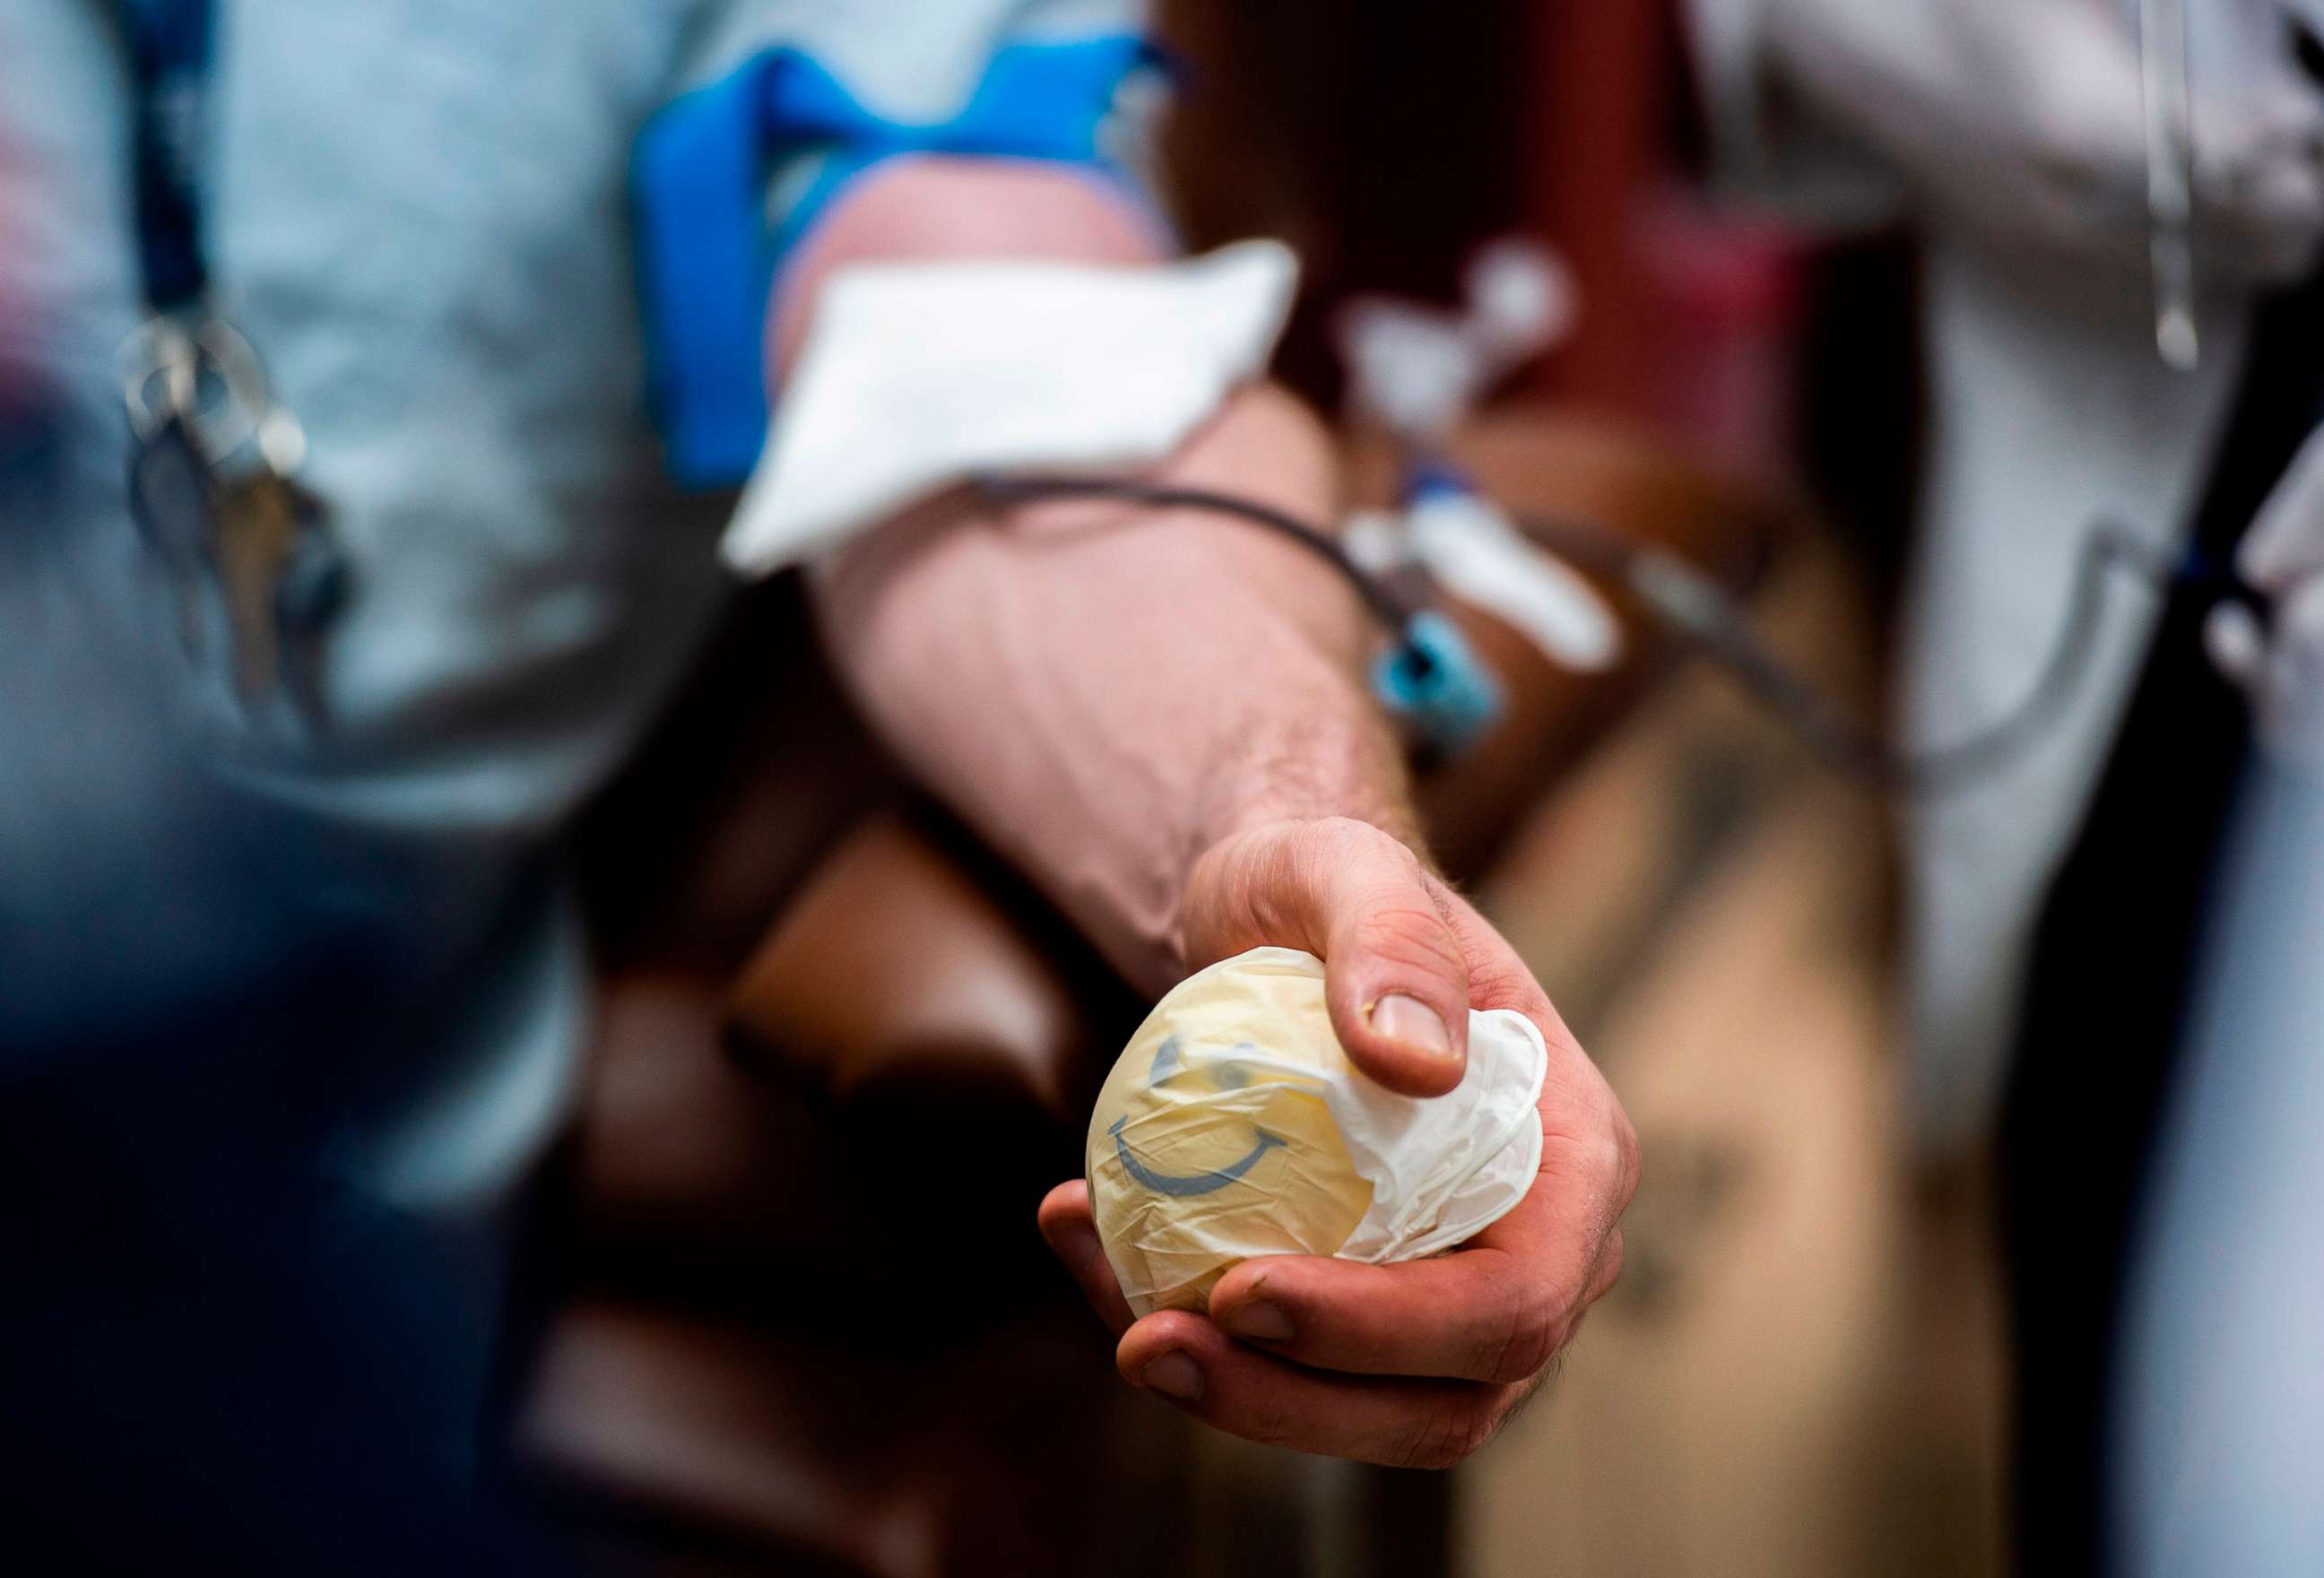 PHOTO: A man squeezes a ball as he donates blood in an INOVA Hospitals Bloodmobile in Washington, D.C., July 21, 2020. This is the first time INOVA has had a mobile blood drive since the rise of COVID-19 cases in the D.C. region. 